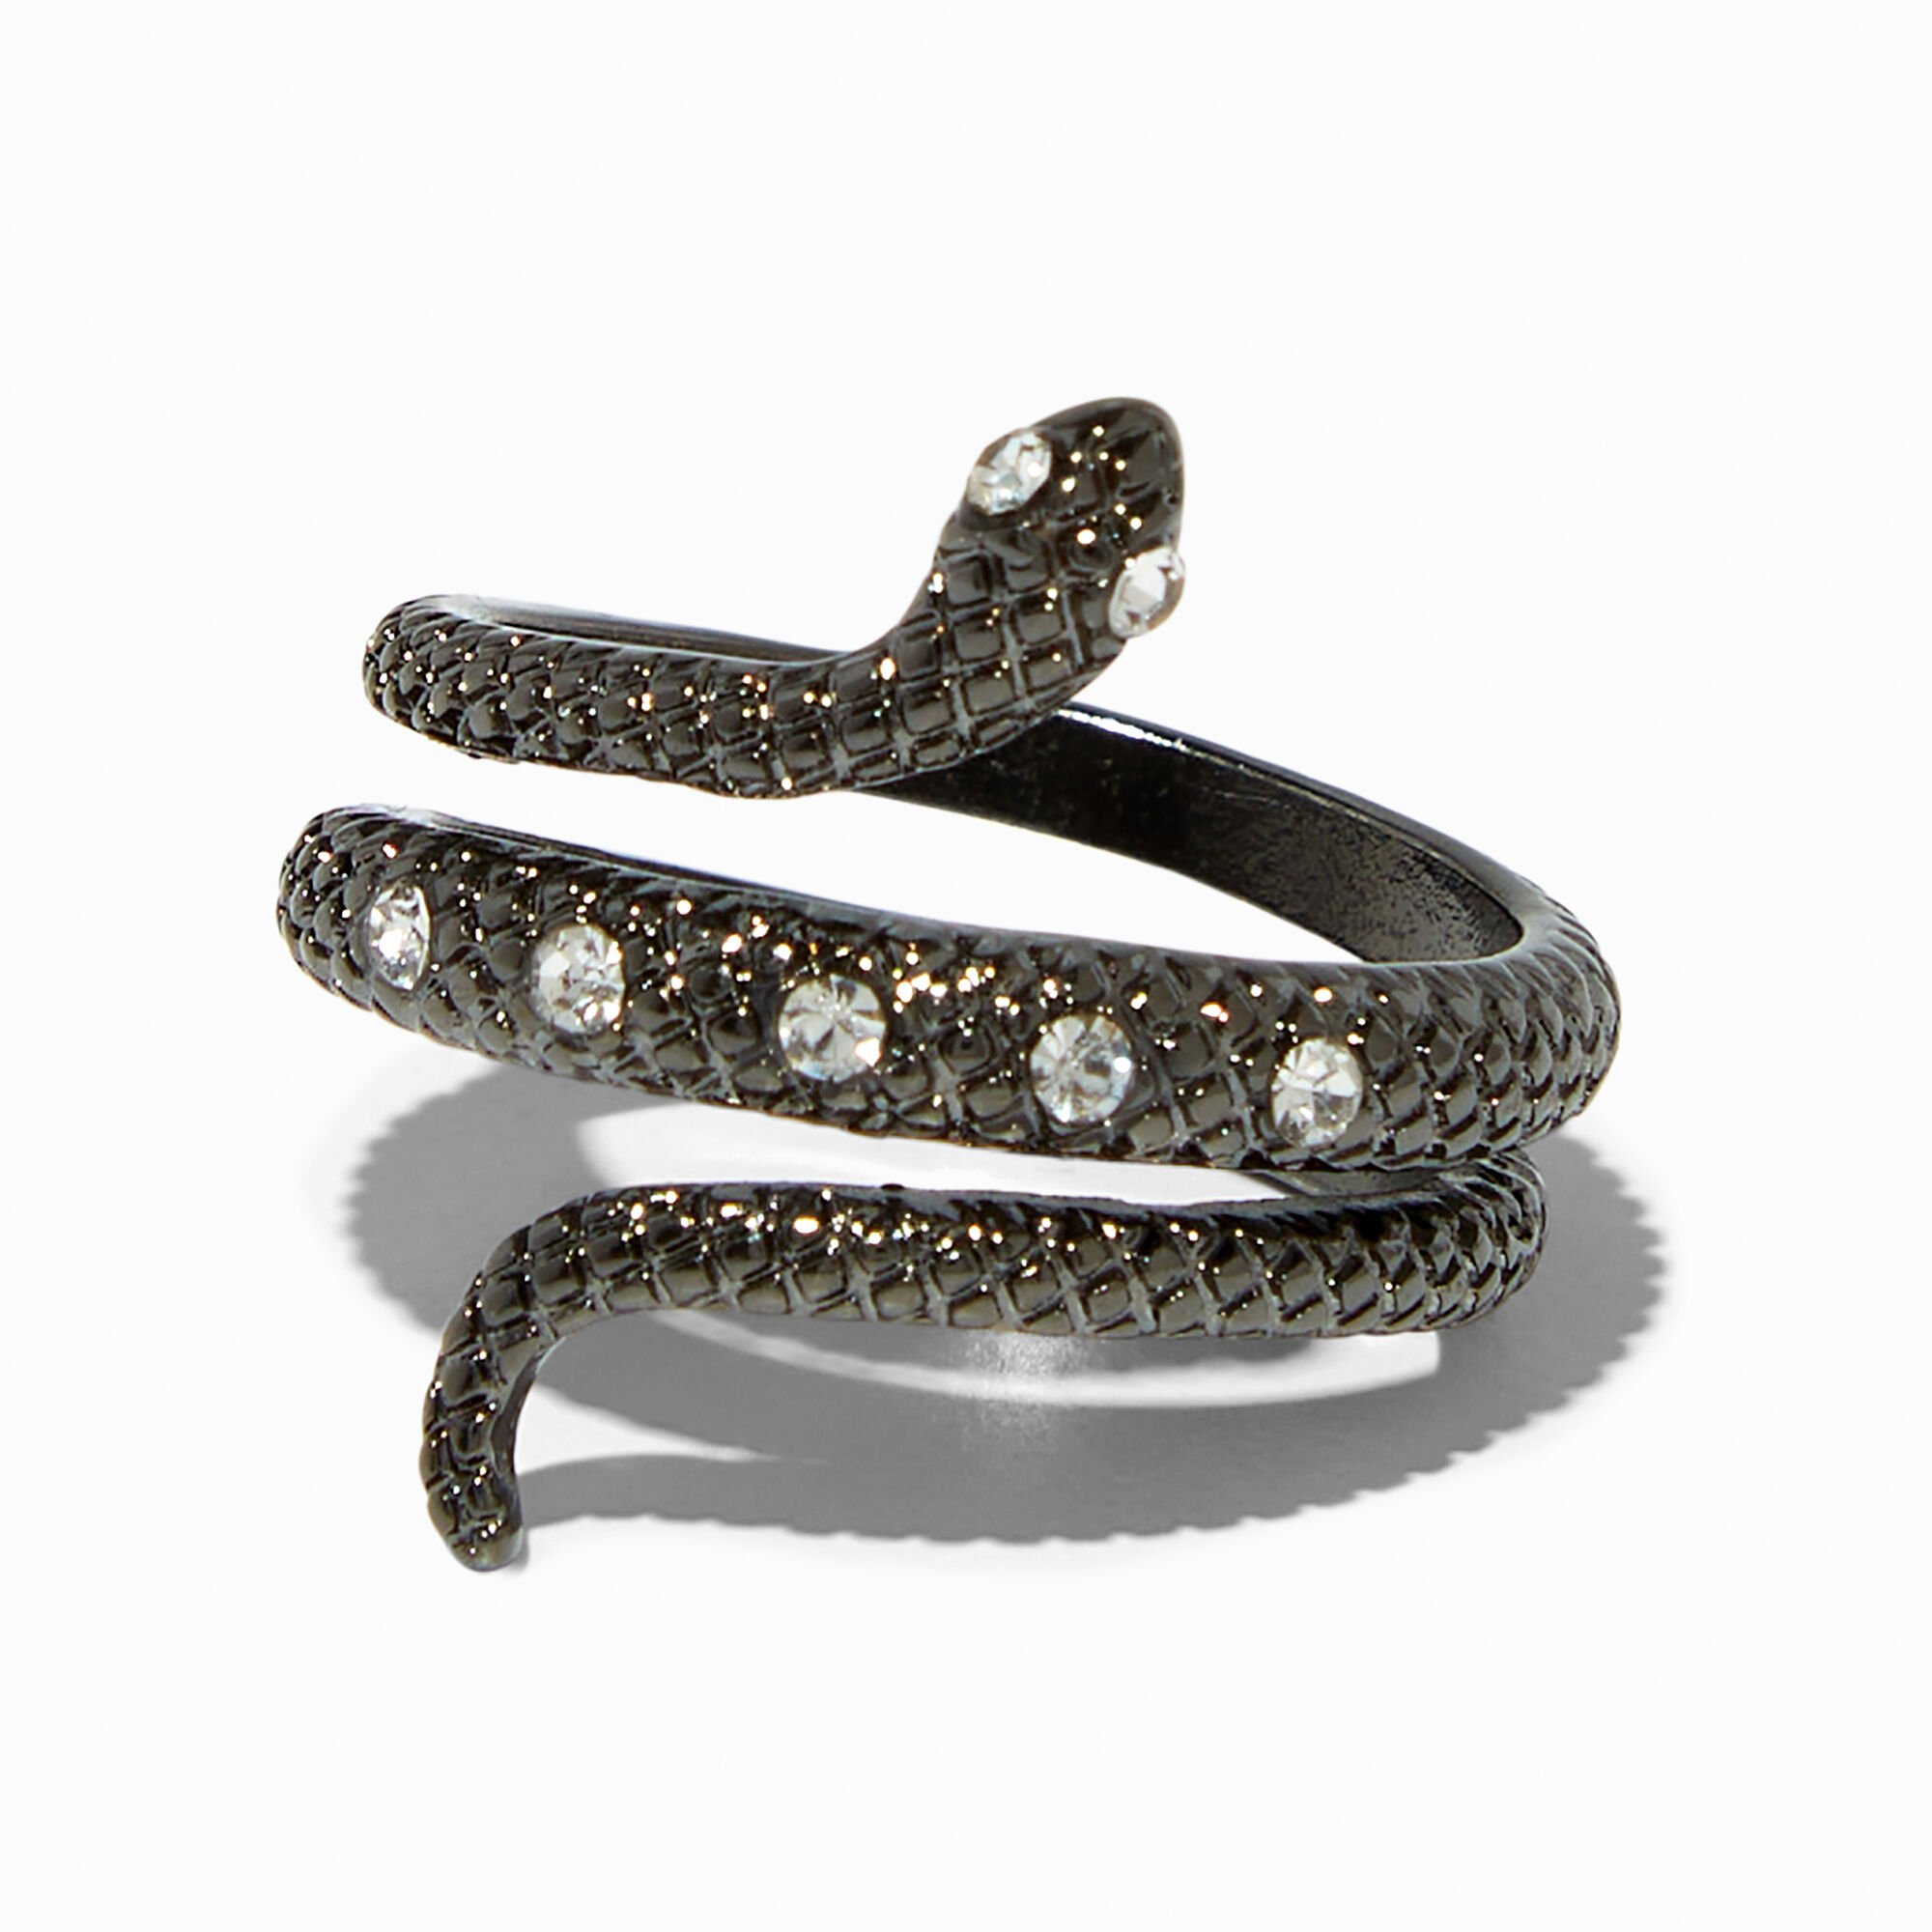 View Claires Hematite Crystal Textured Snake Wrap Ring information